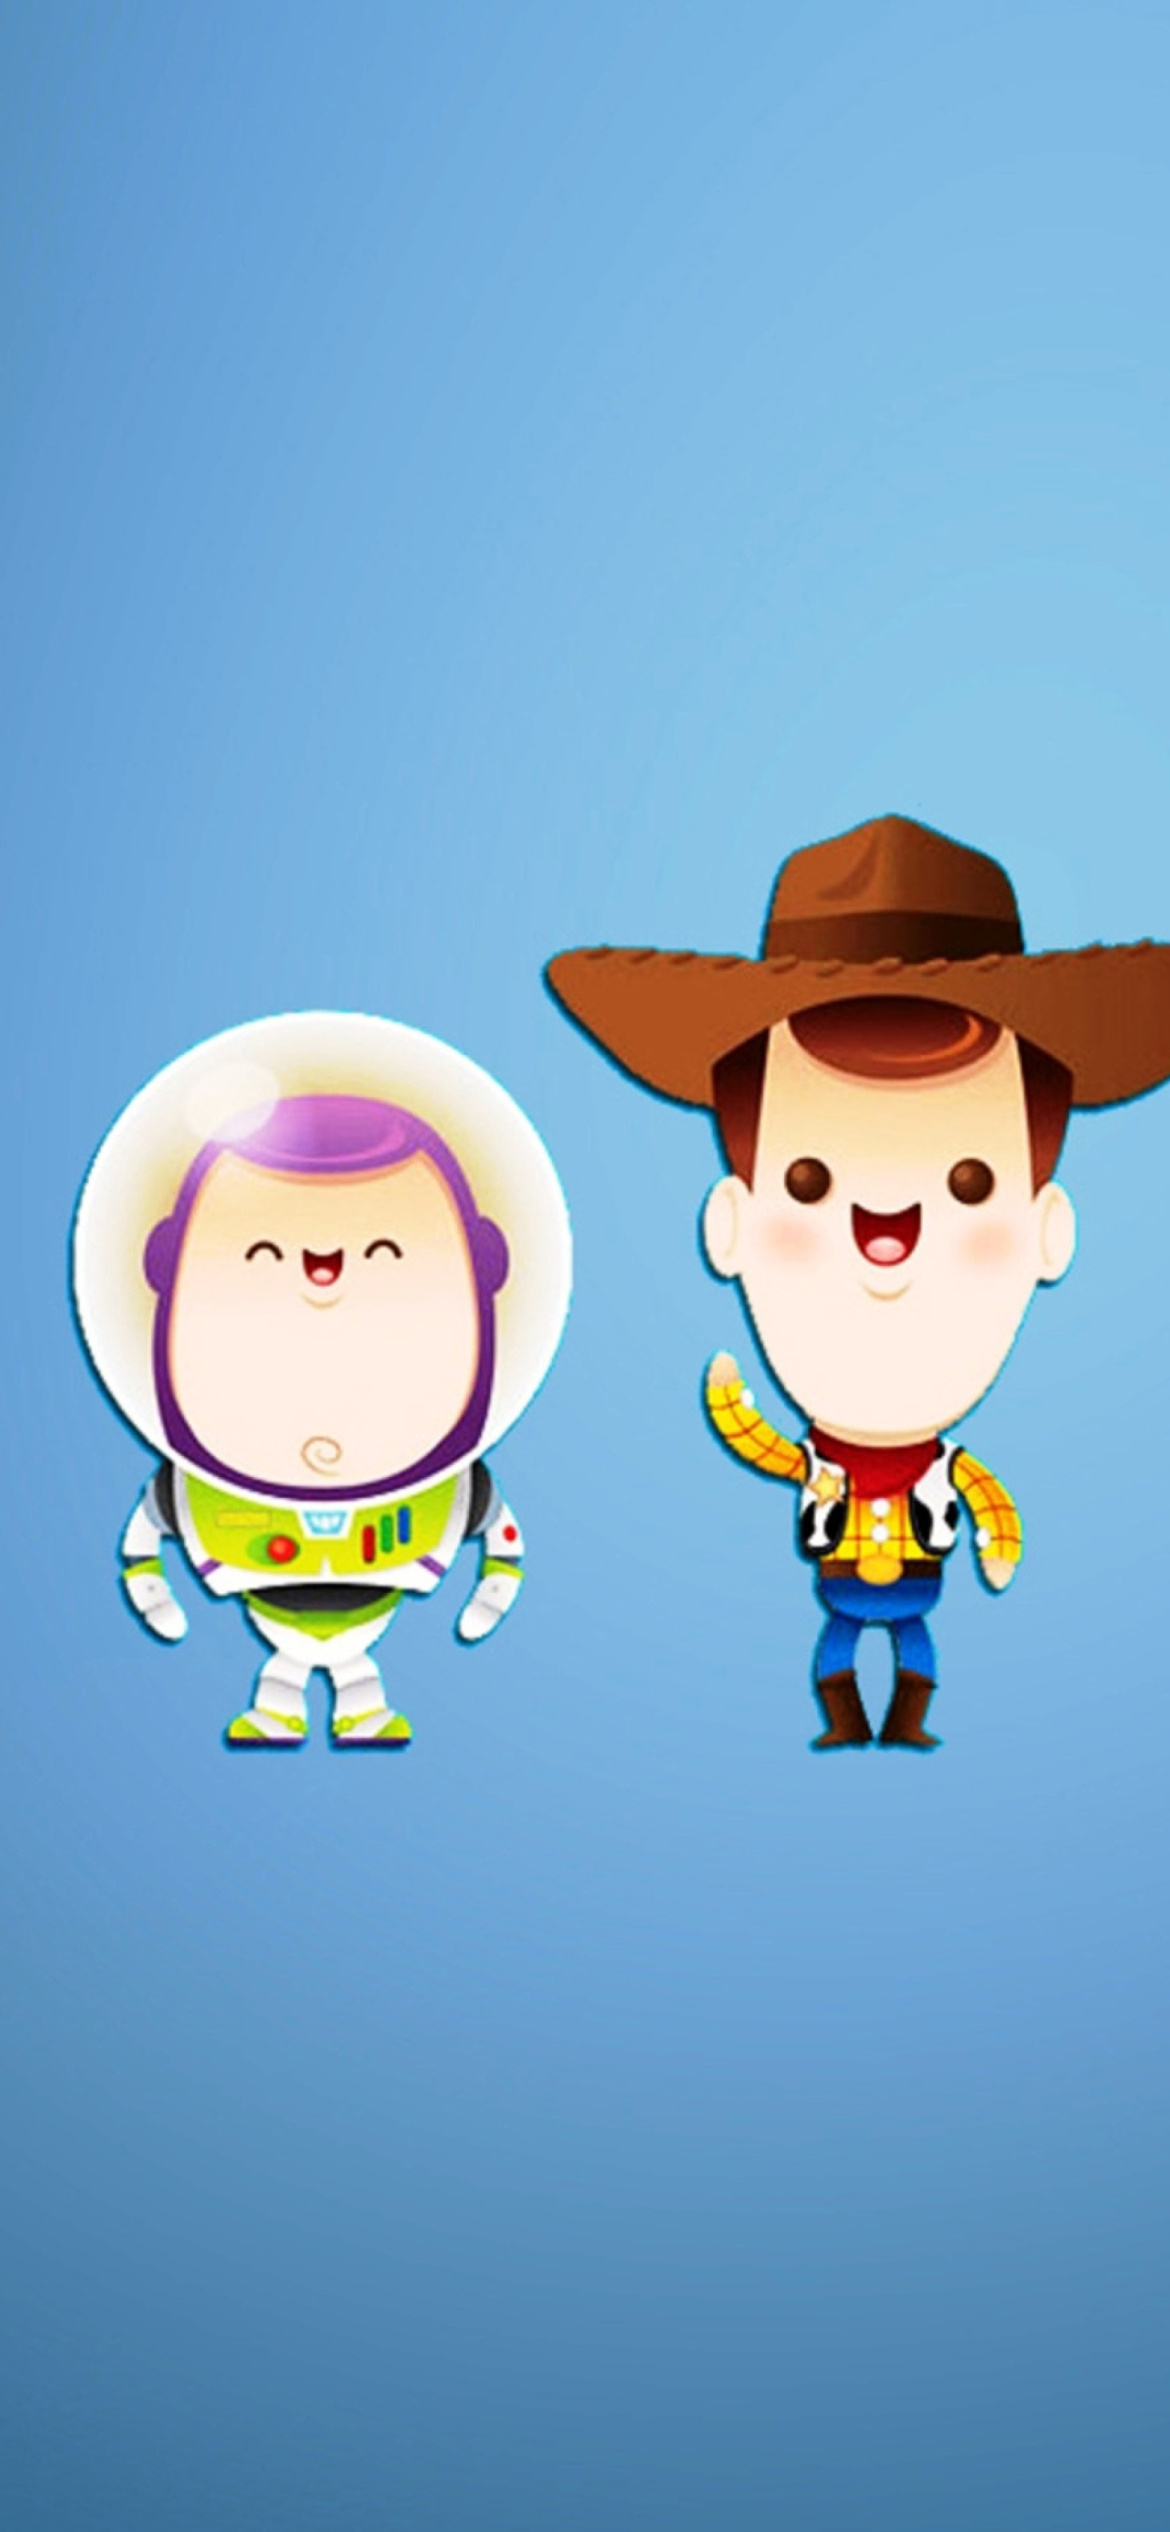 Buzz and Woody in Toy Story wallpaper 1170x2532